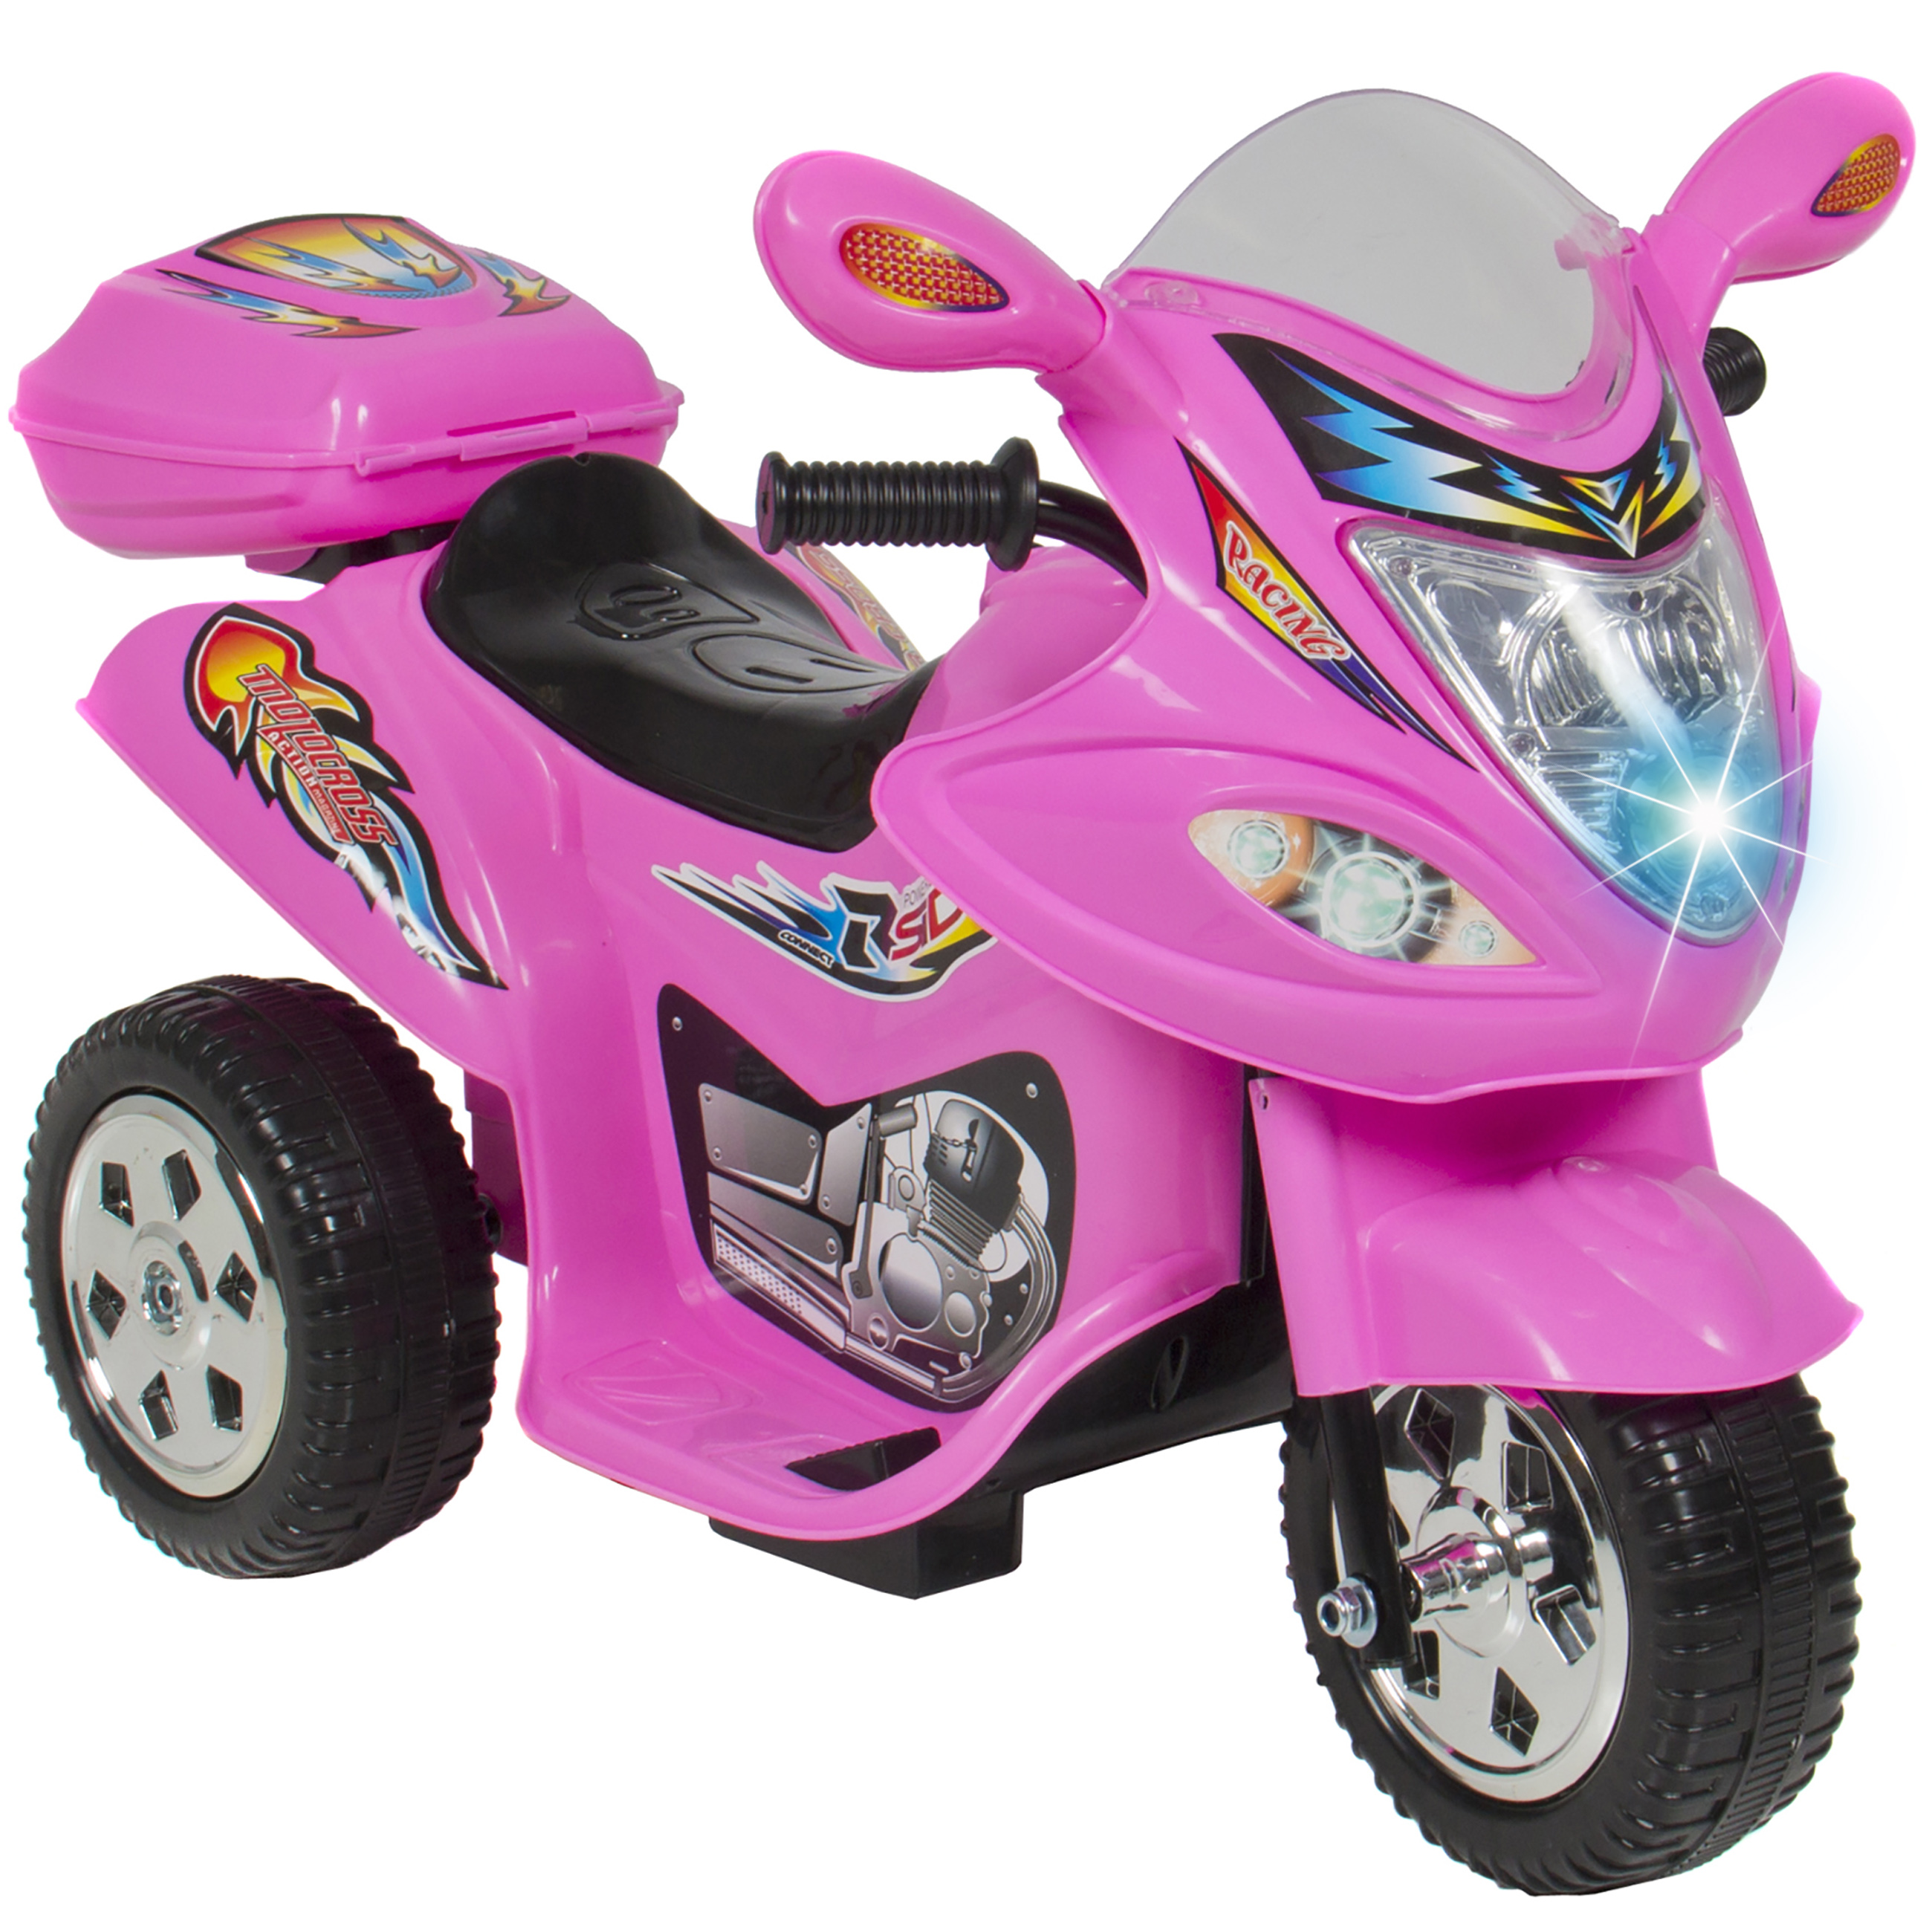 Kids Ride On Motorcycle 6V Toy Battery Powered Electric 3 Wheel ...